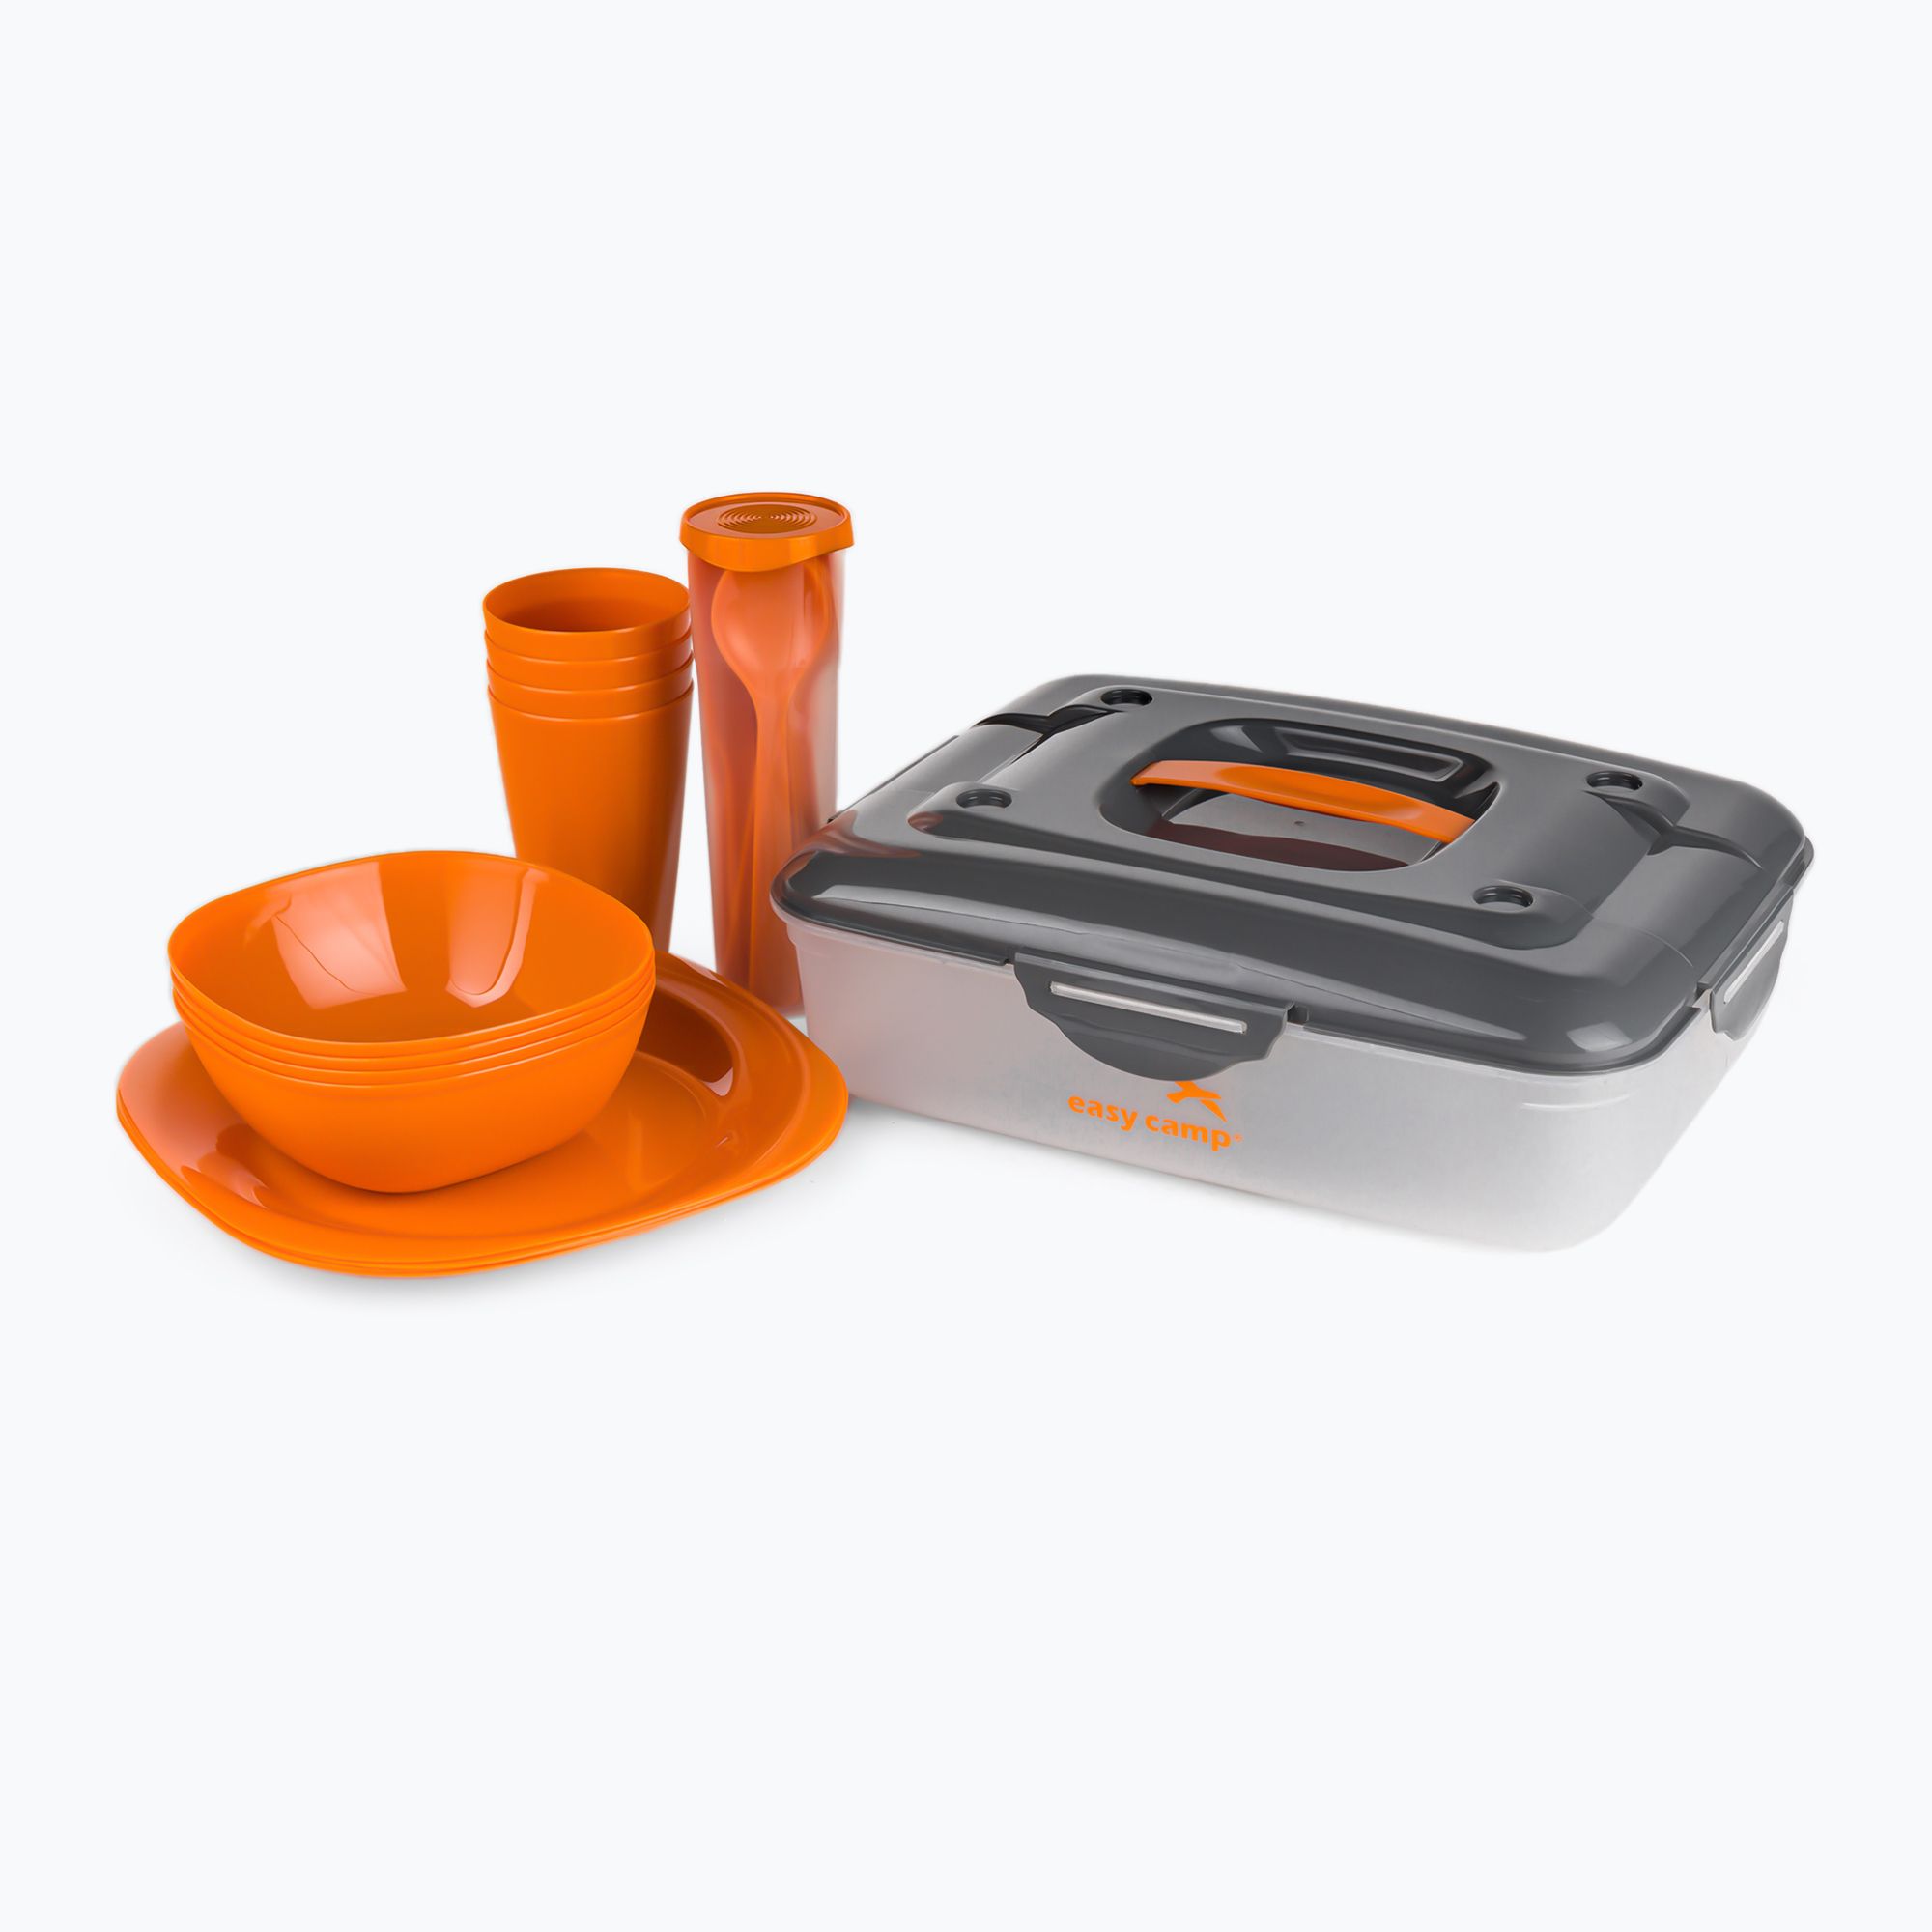 Easy Camp Cerf Picnic Box orange 680162 4 set hiking Persons cookware